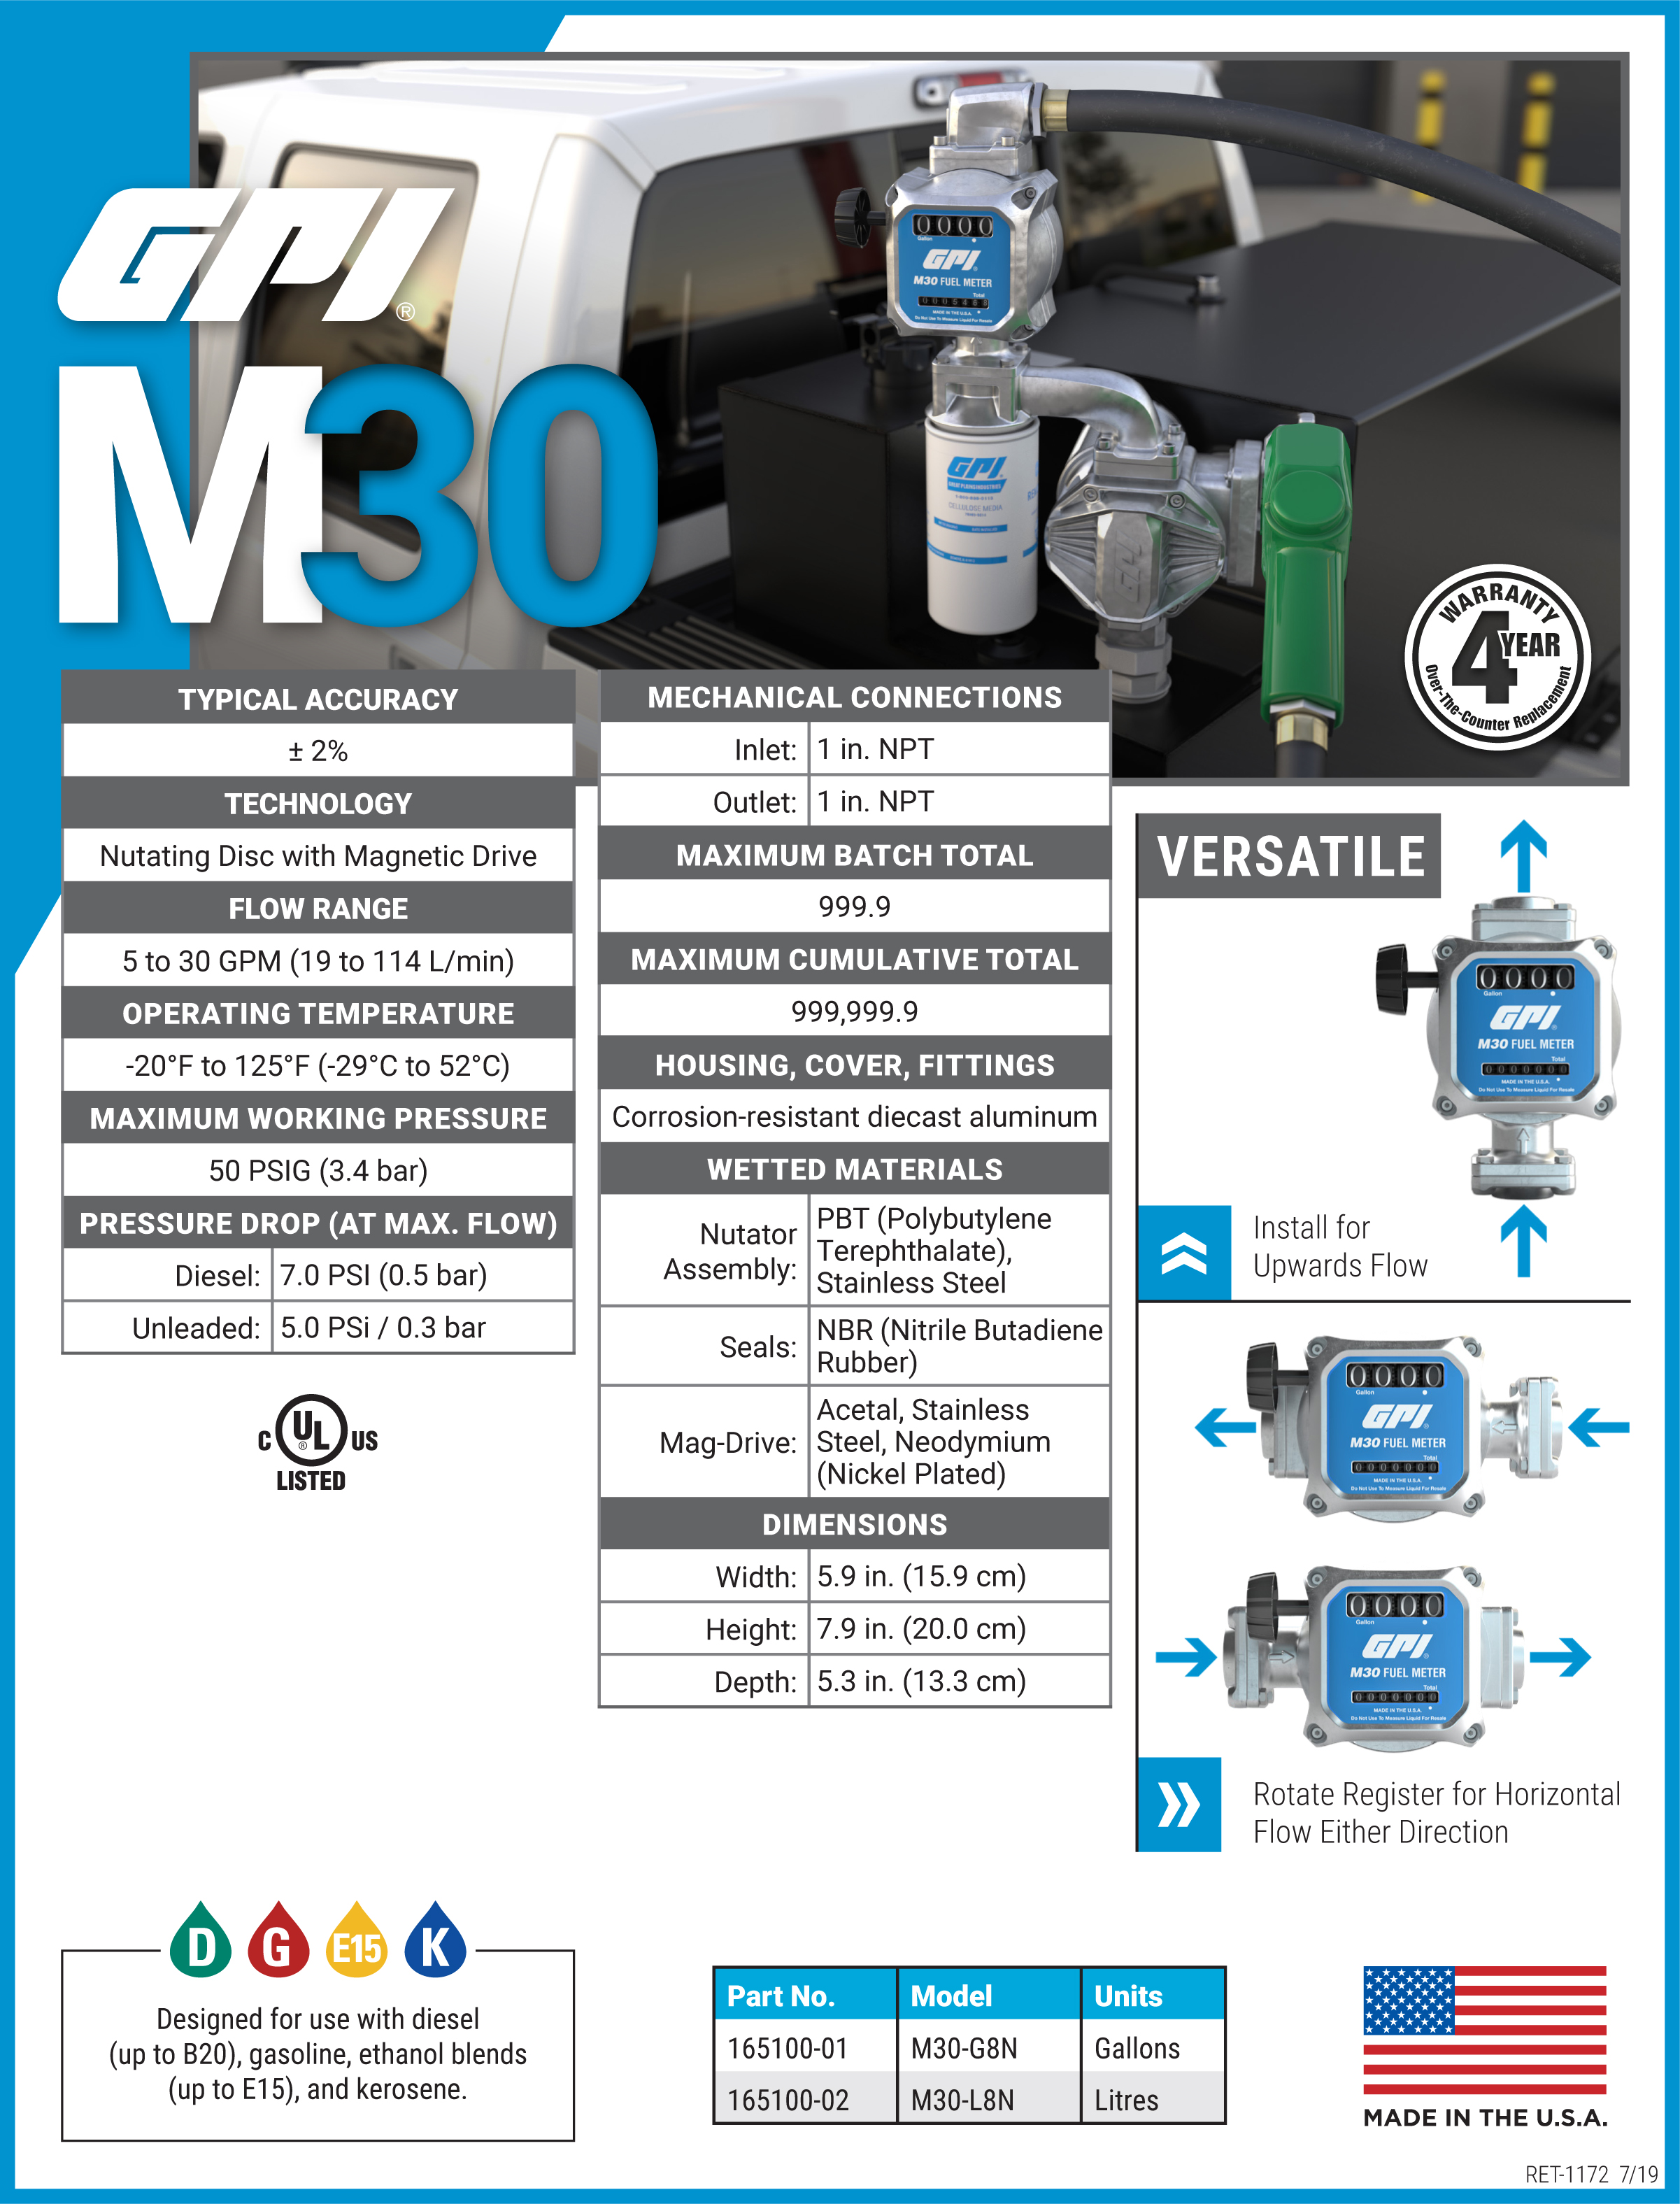 GPI M30 Meter Specifications